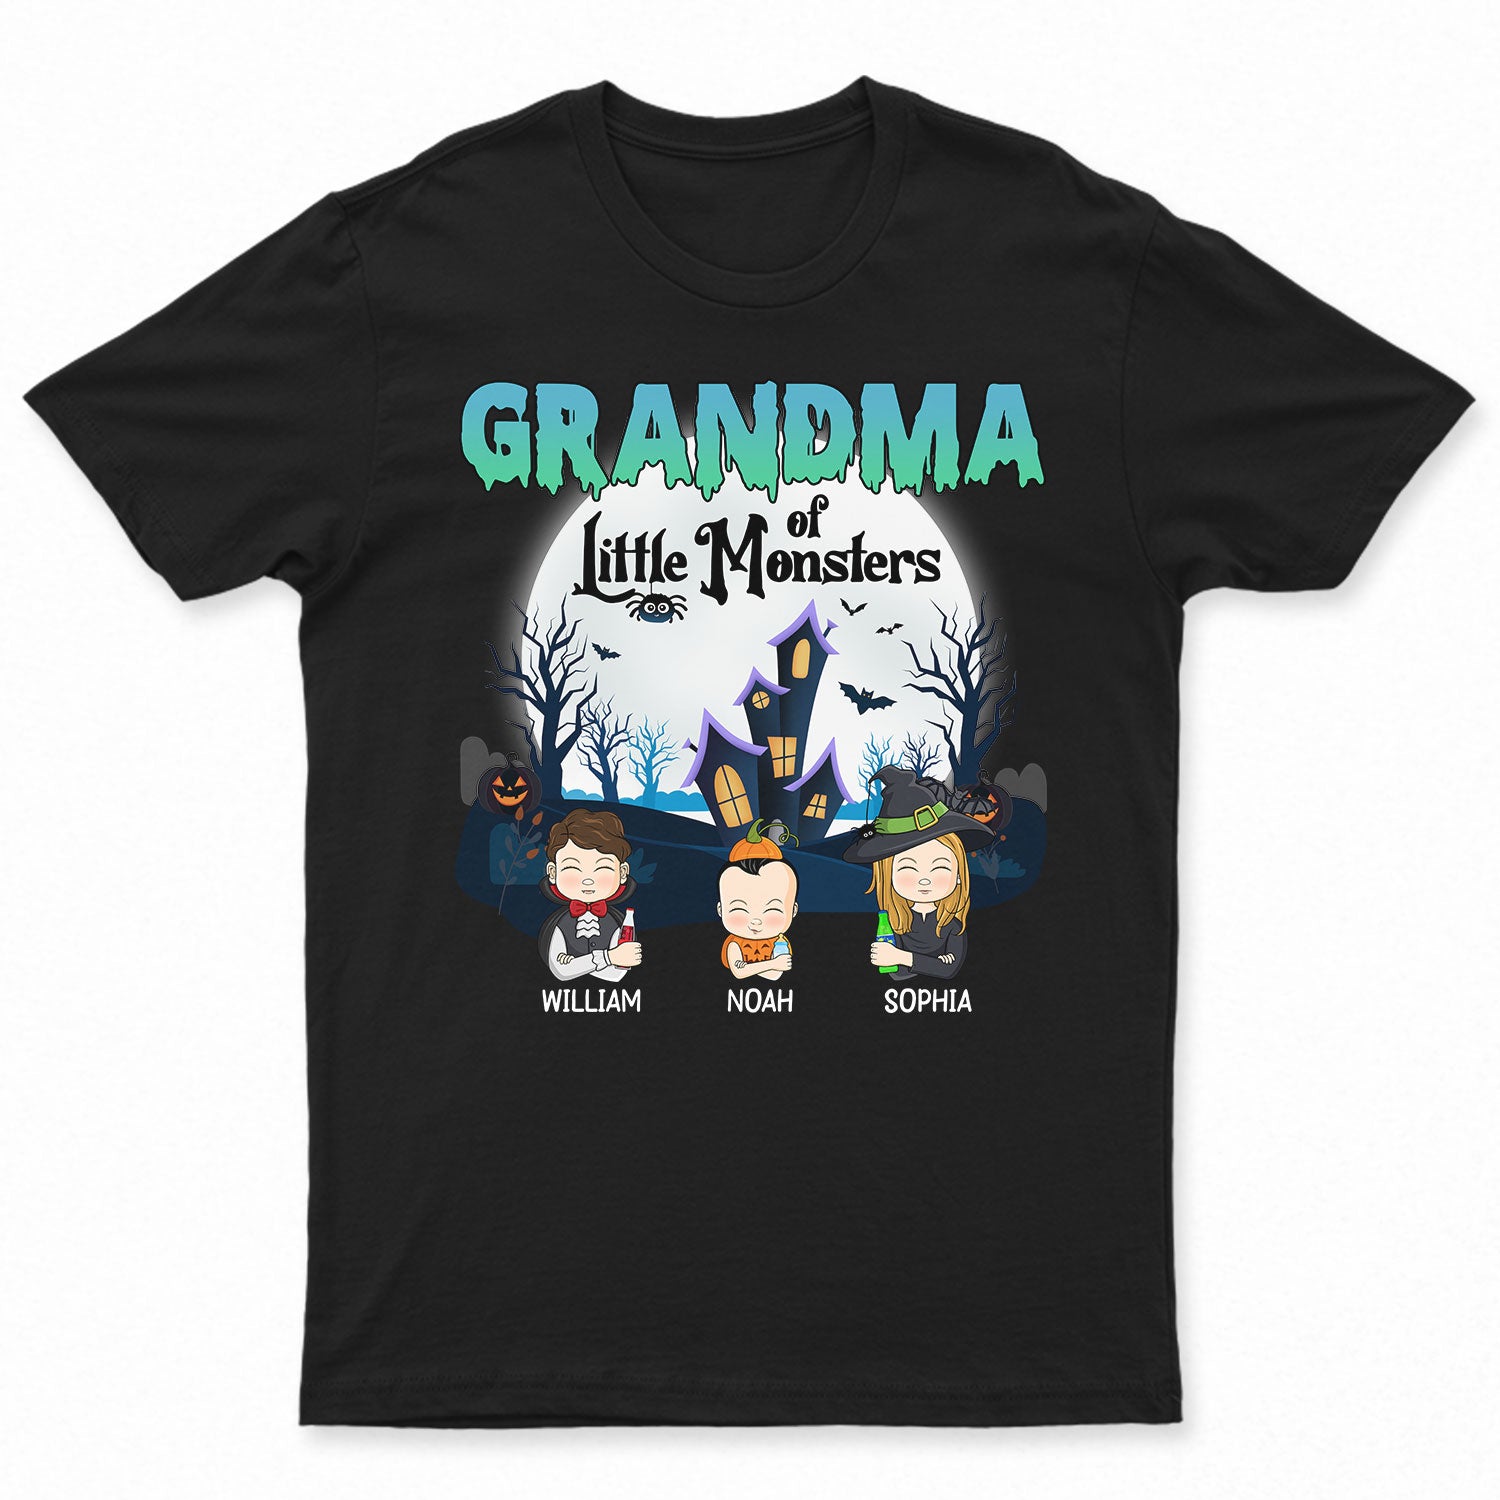 Grandma Of Little Monsters - Halloween Gift For Grandma, Grandparents, Mom, Dad, Family - Personalized T Shirt